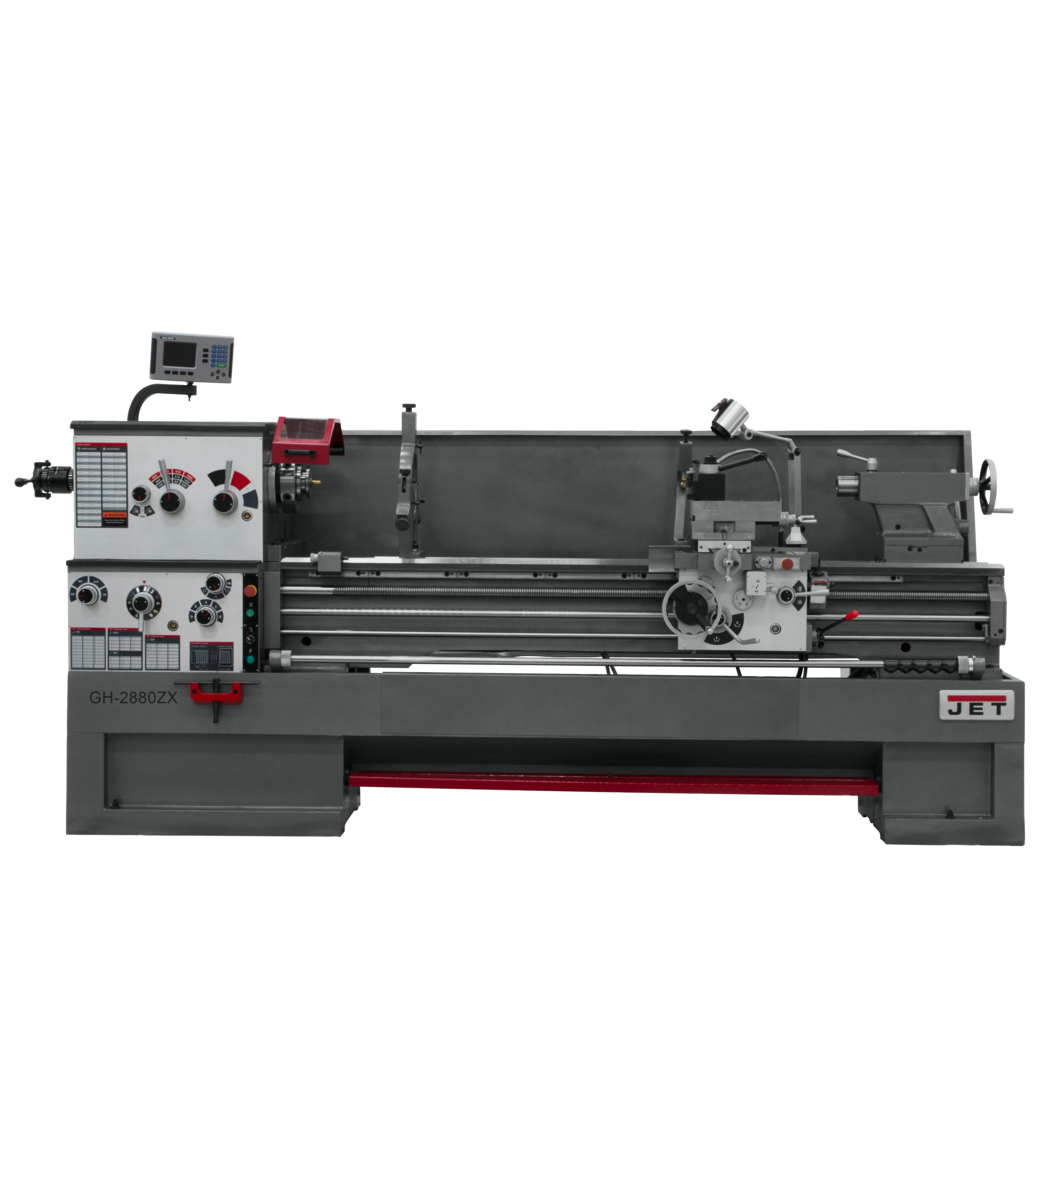 321568, GH-2280ZX, with 2-axis ACU-RITE 203 DRO and Collet Closer & Taper Attachment, Jet, Metalworking, Turning, Lathes